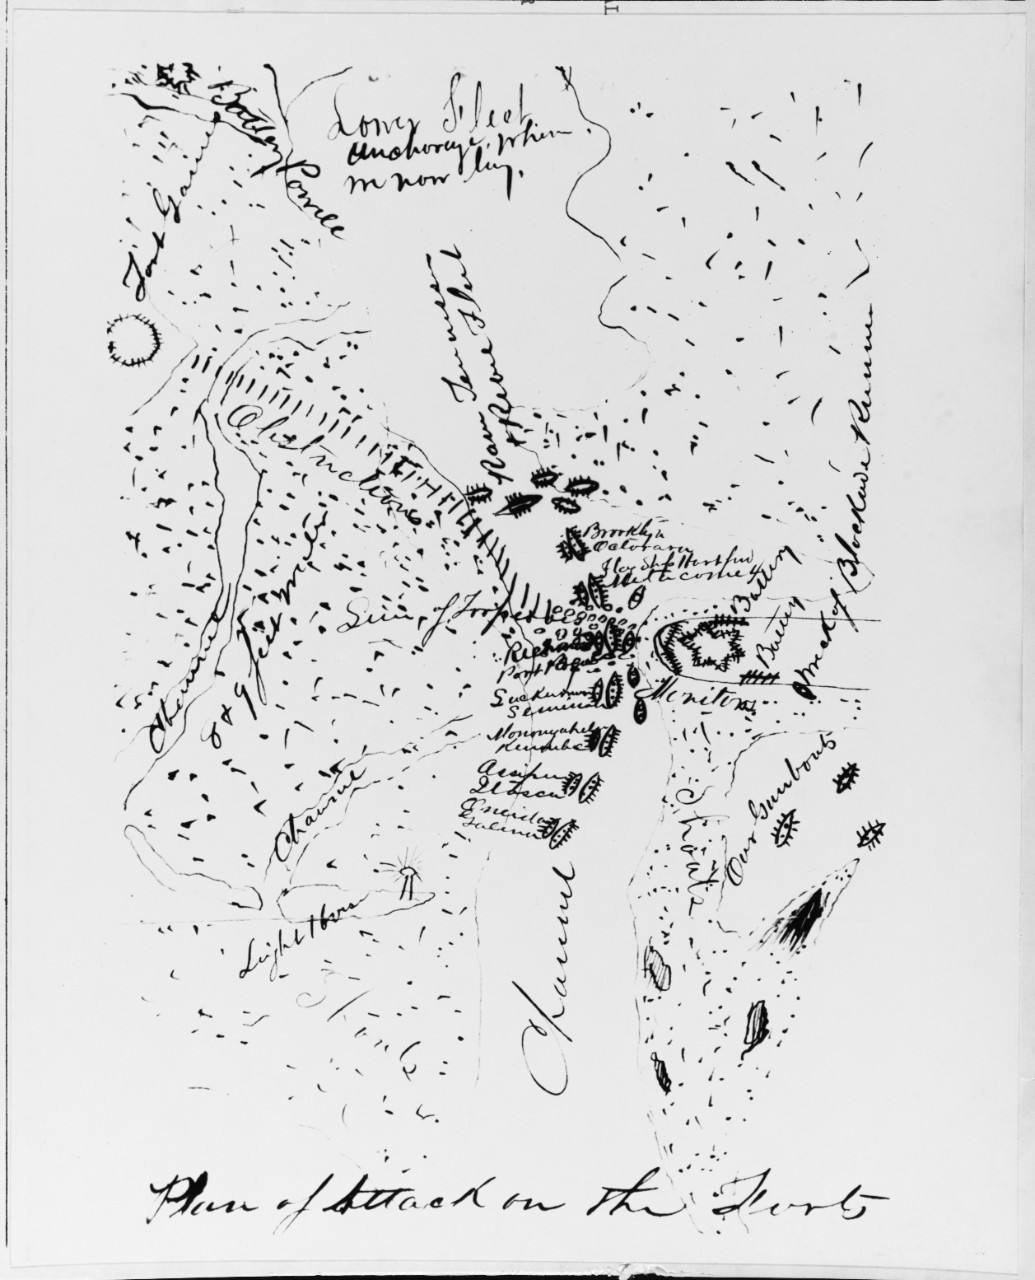 Mobile Bay plan of attack on the forts